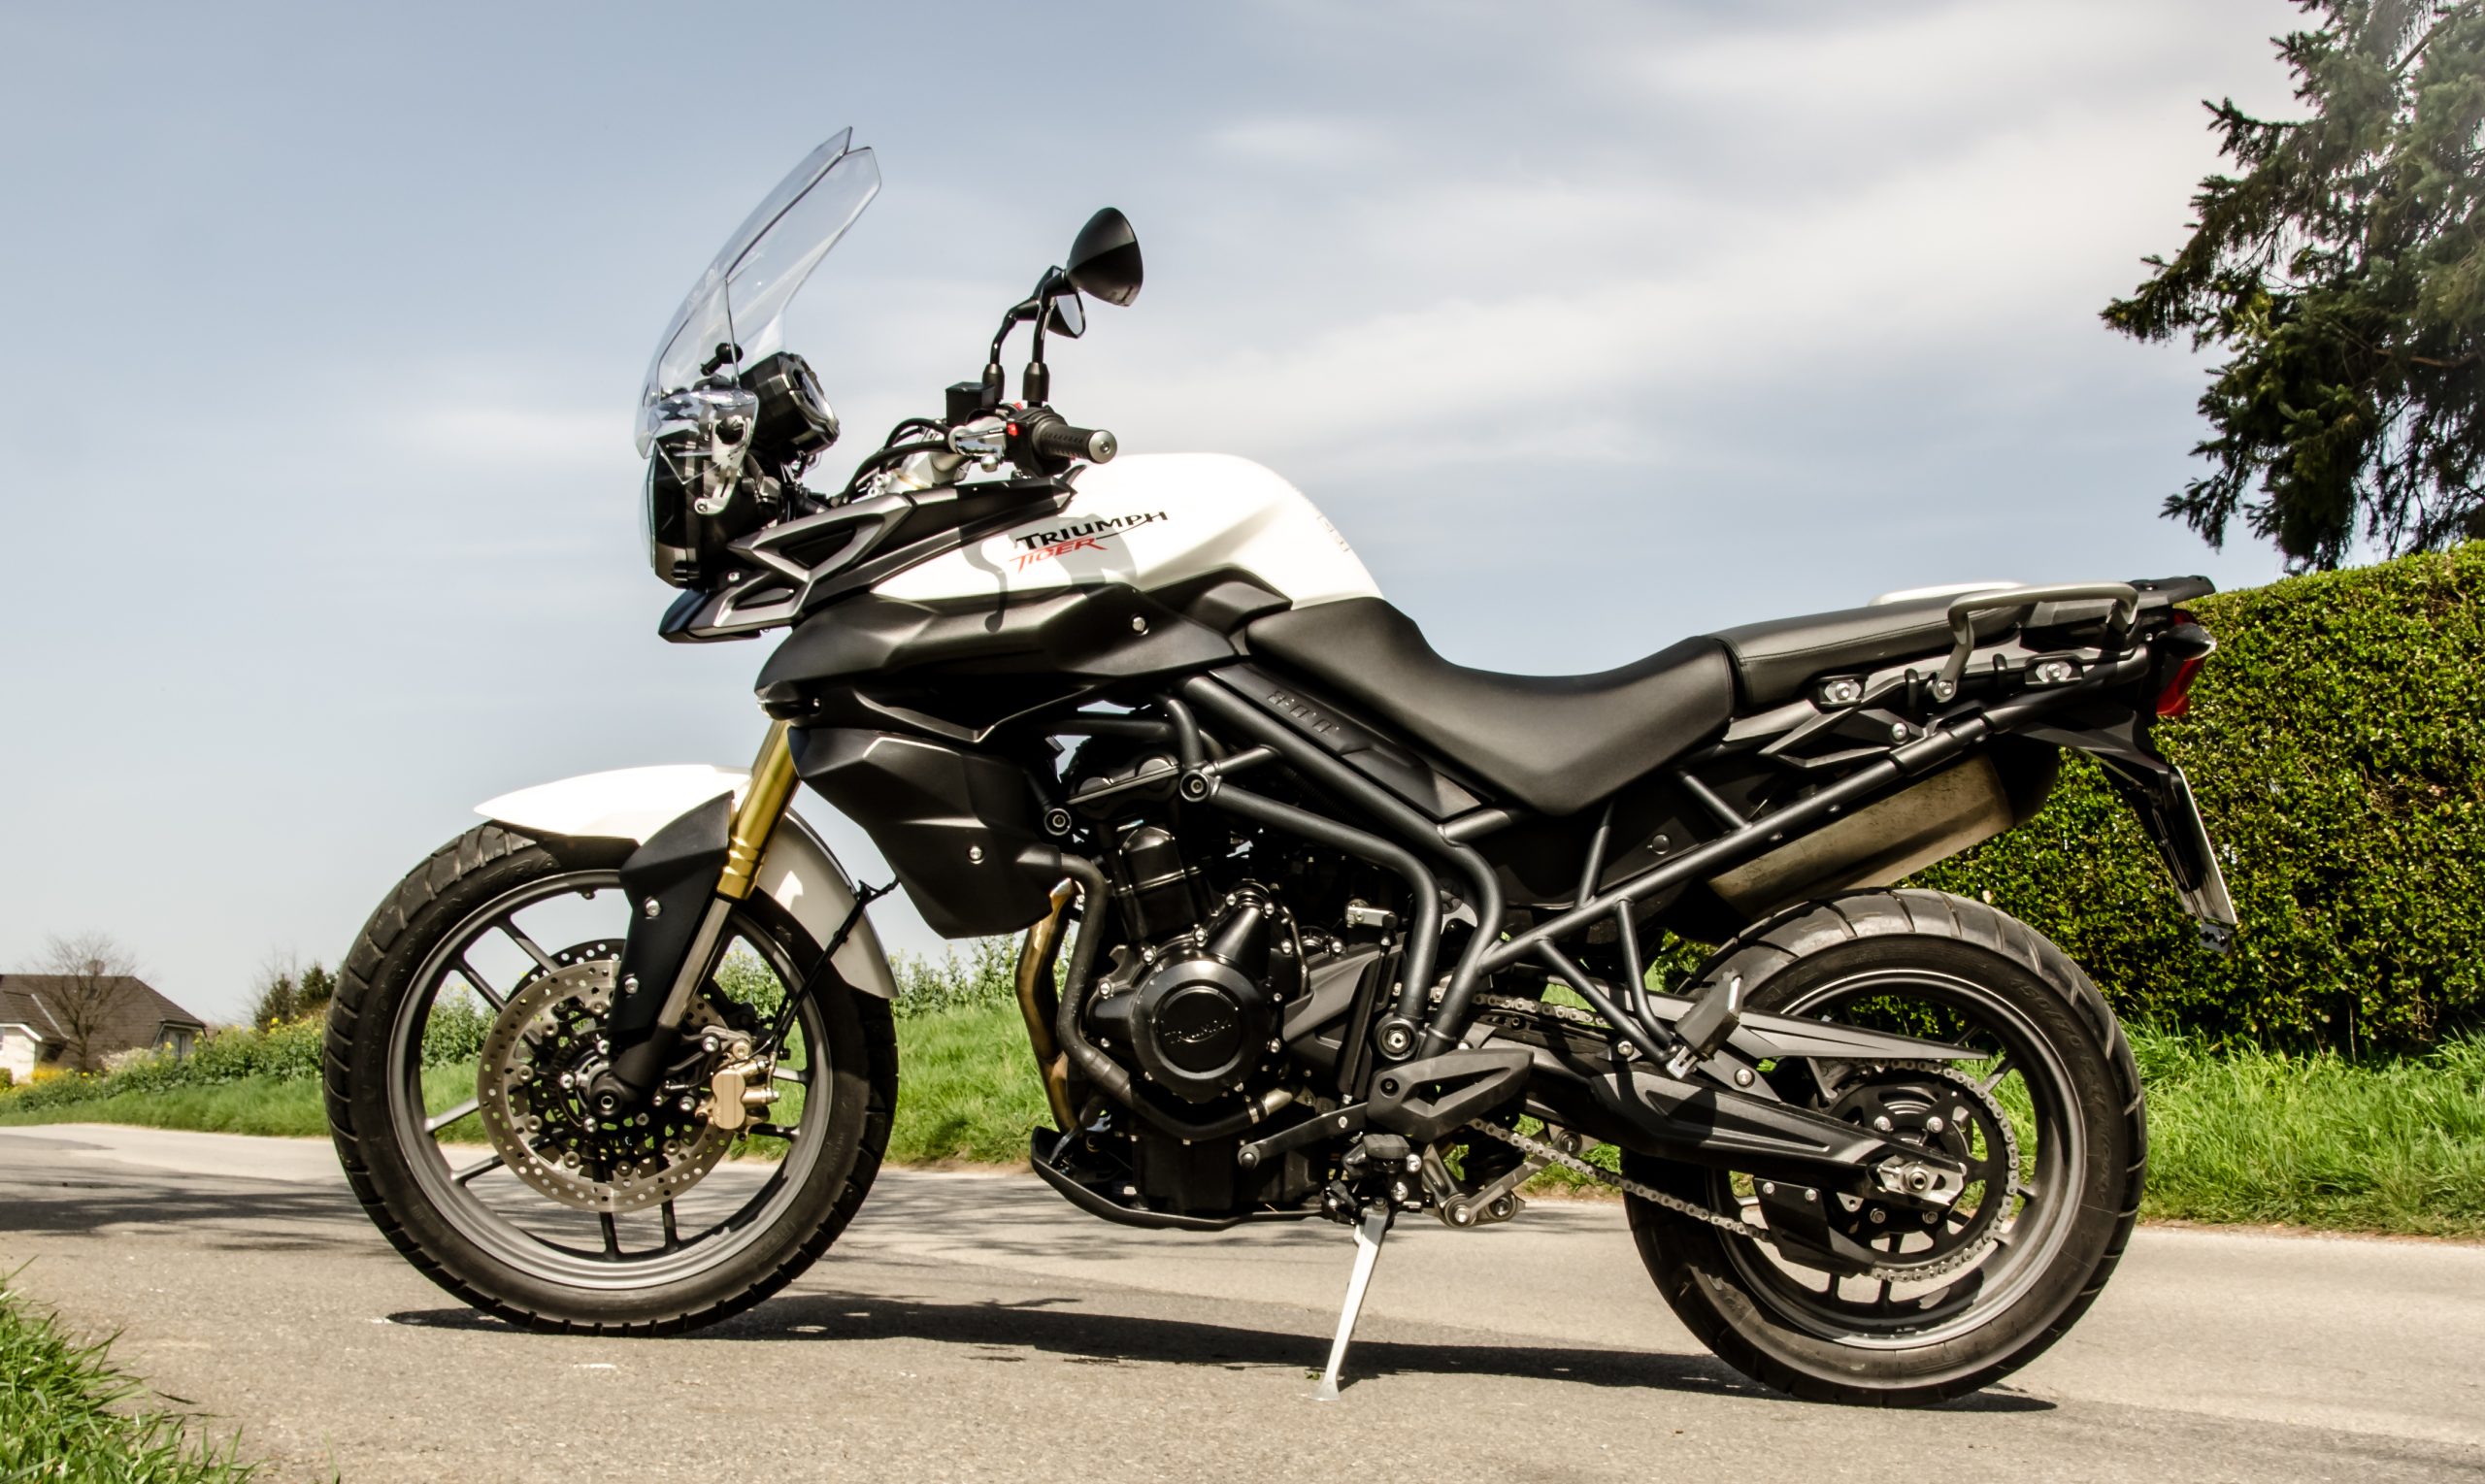 Triumph Tiger 1200: The Ultimate Long-Distance Adventure Motorcycle